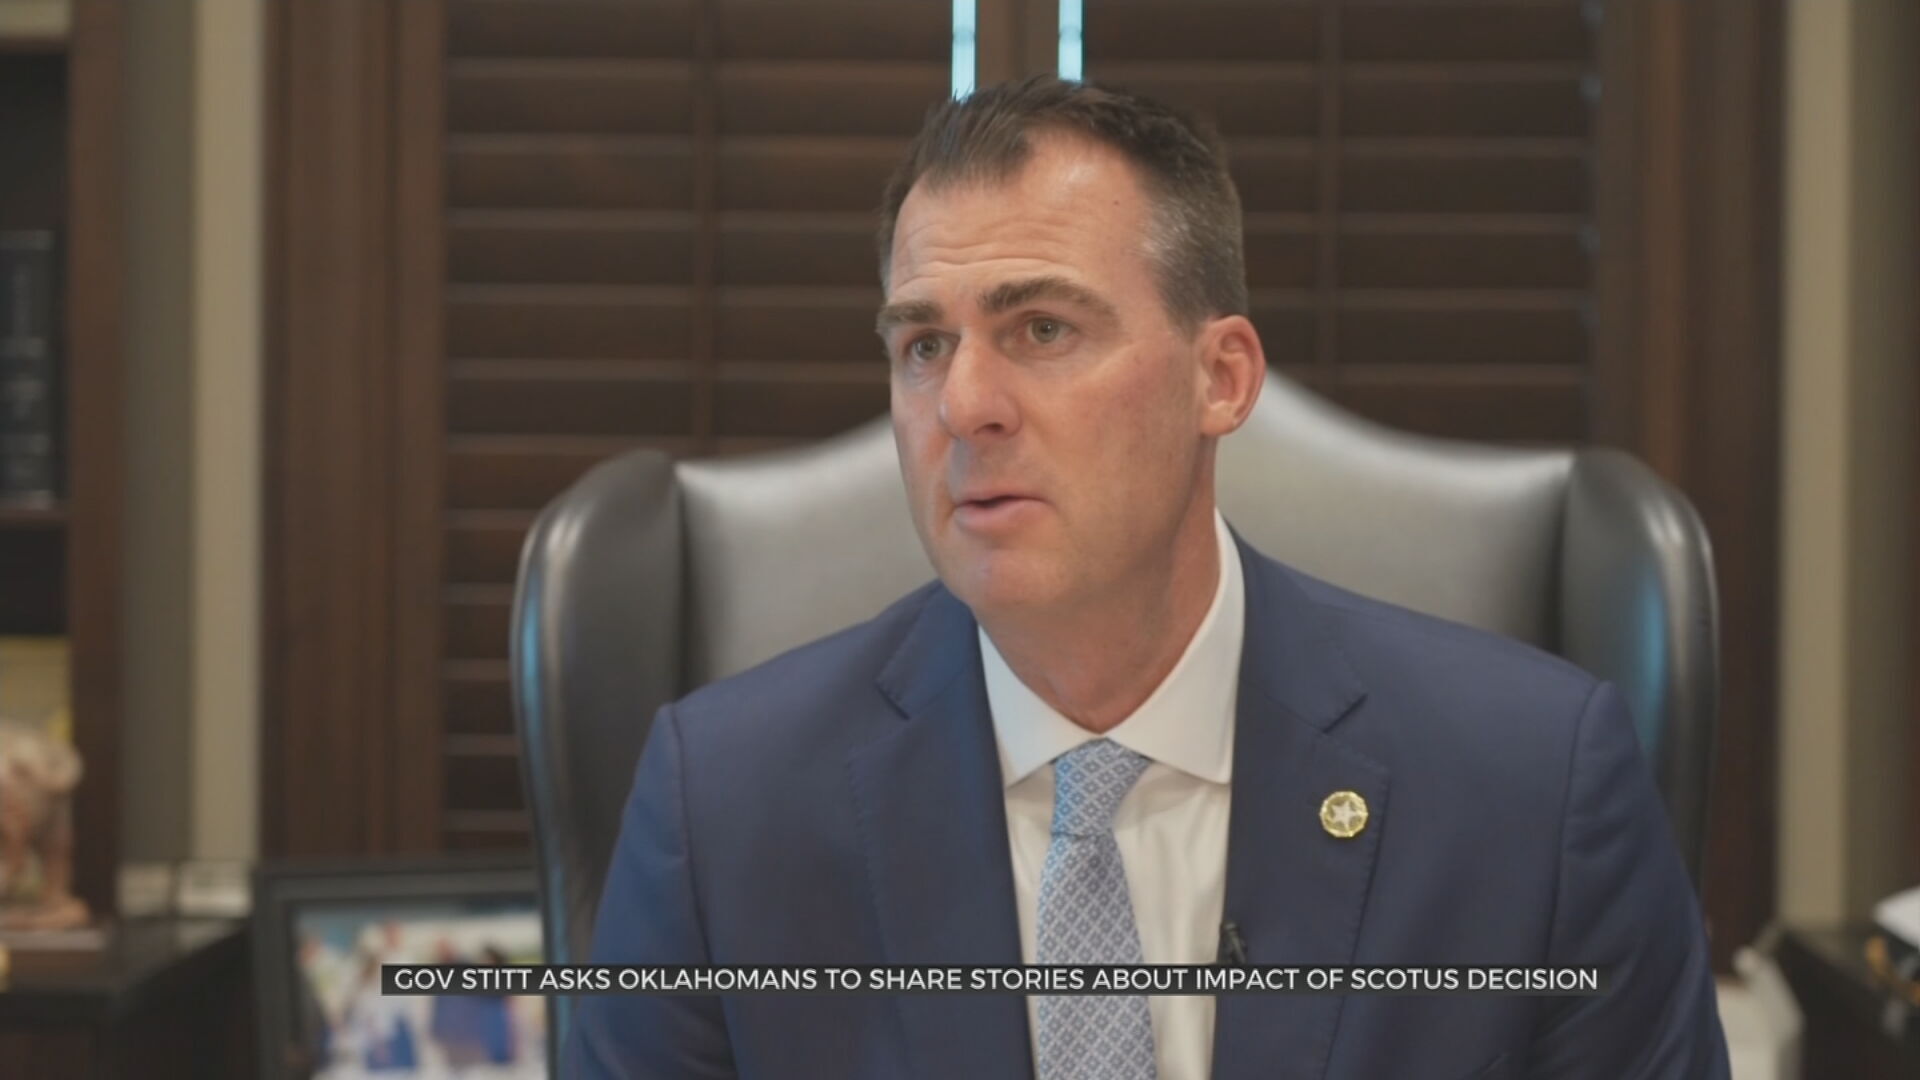 Gov. Stitt Asks Oklahomans To Share Stories About Impact Of Tribal Jurisdiction Ruling 